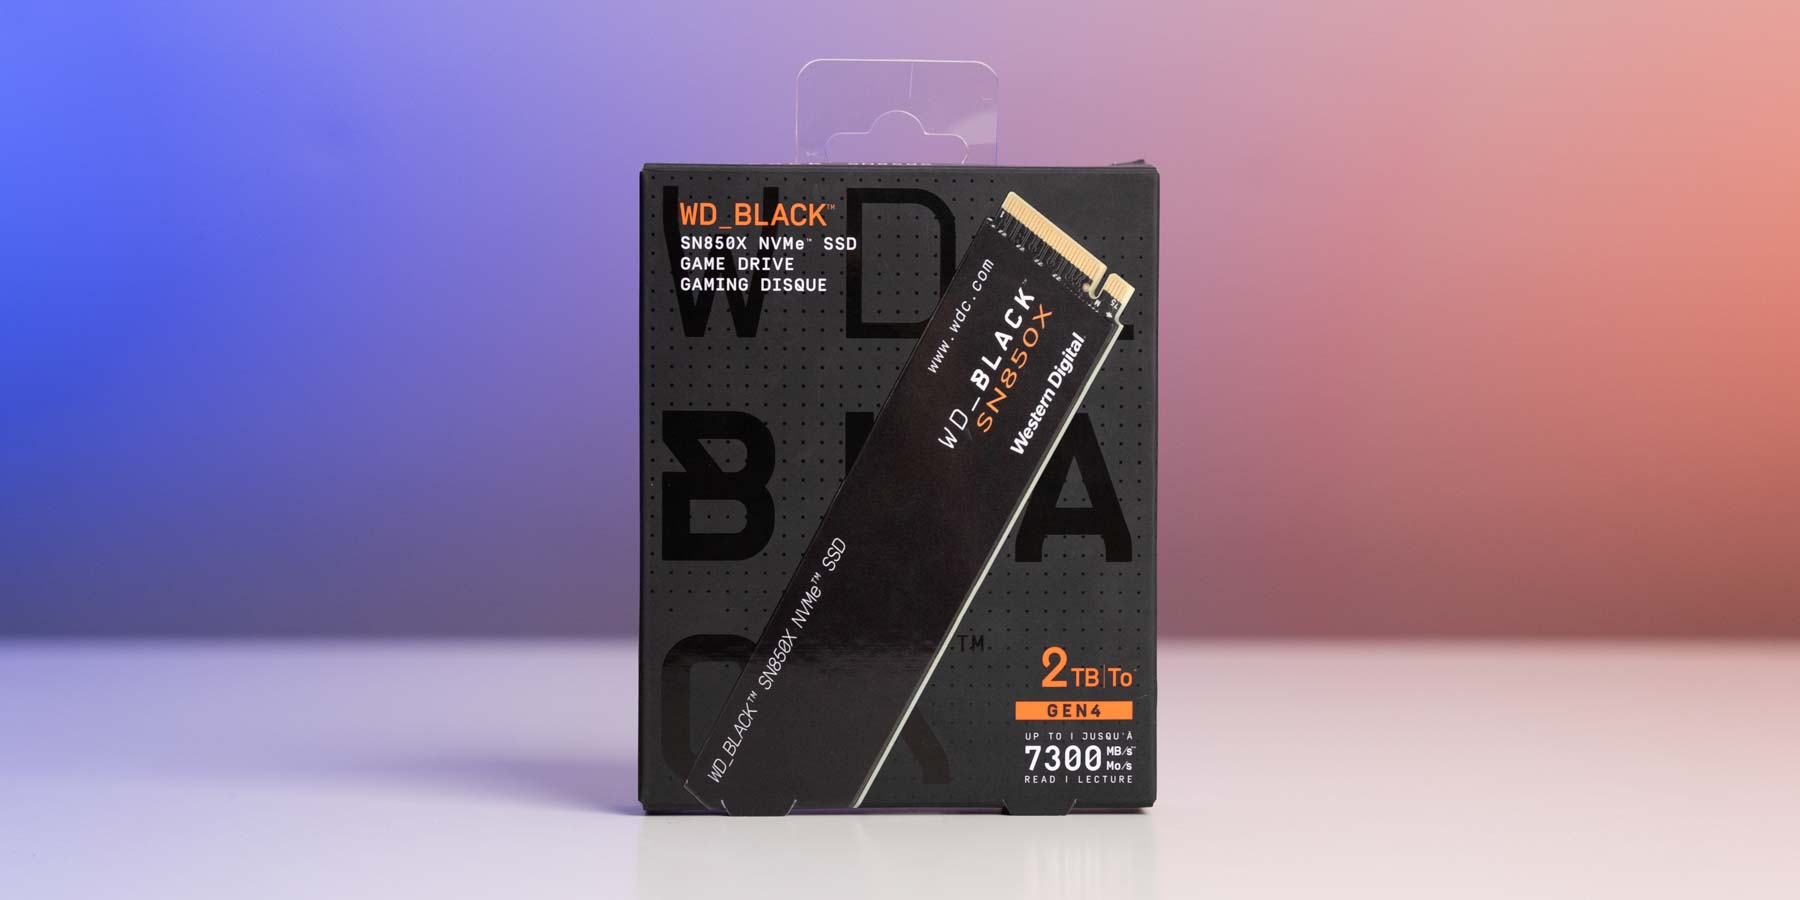 WD_BLACK 2TB SN850X NVMe Internal gaming SSD hits lowest price in